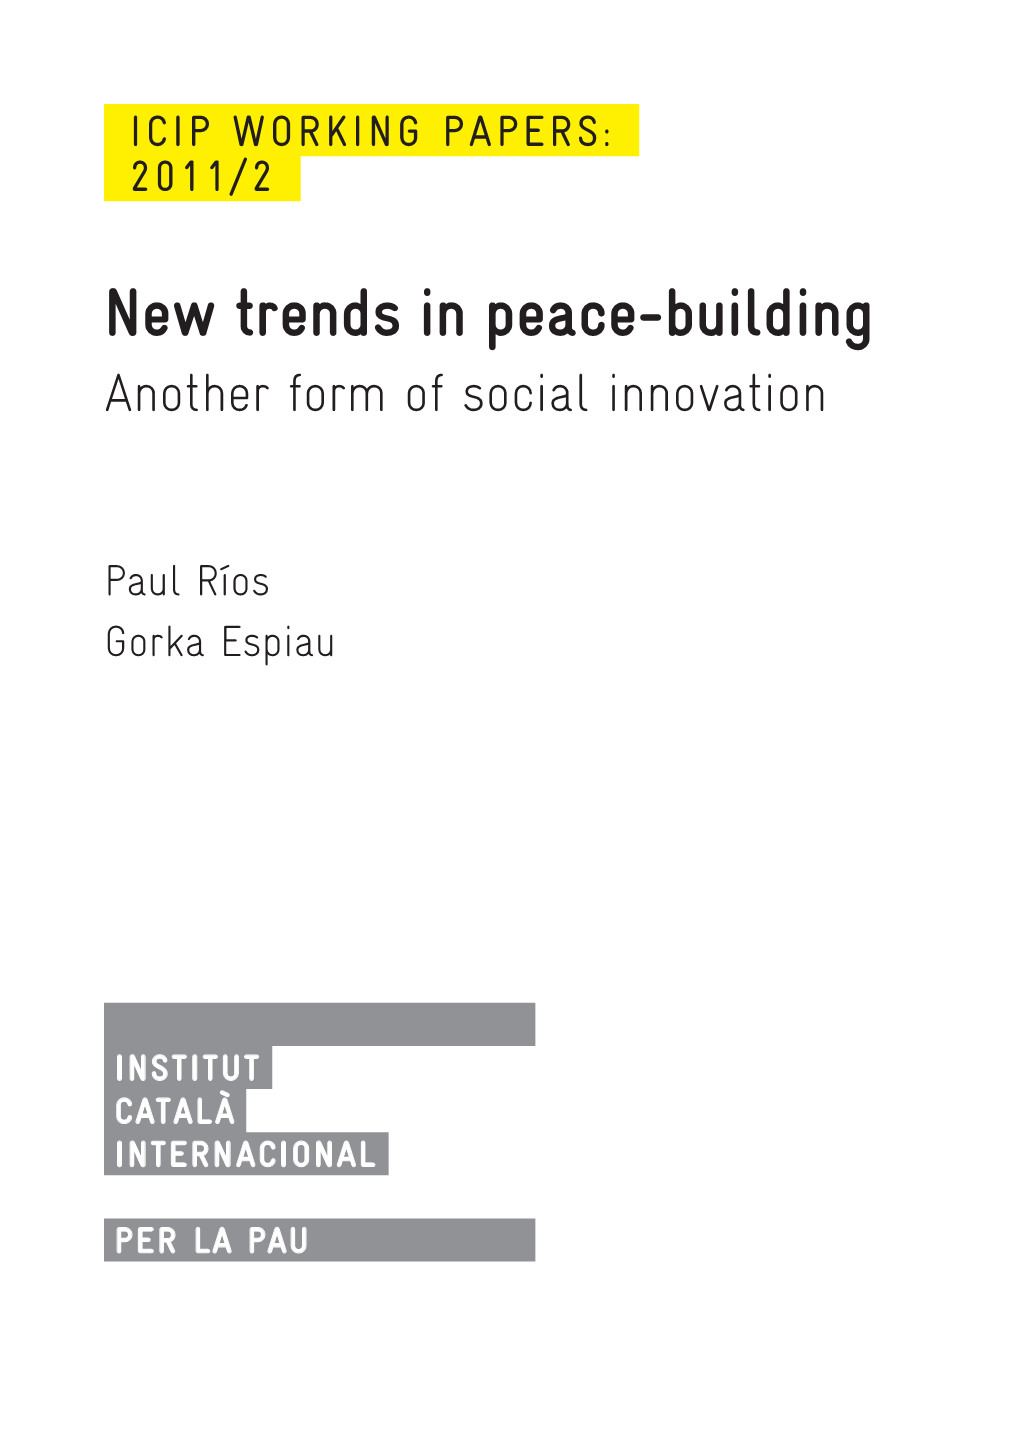 New Trends in Peace-Building Another Form of Social Innovation